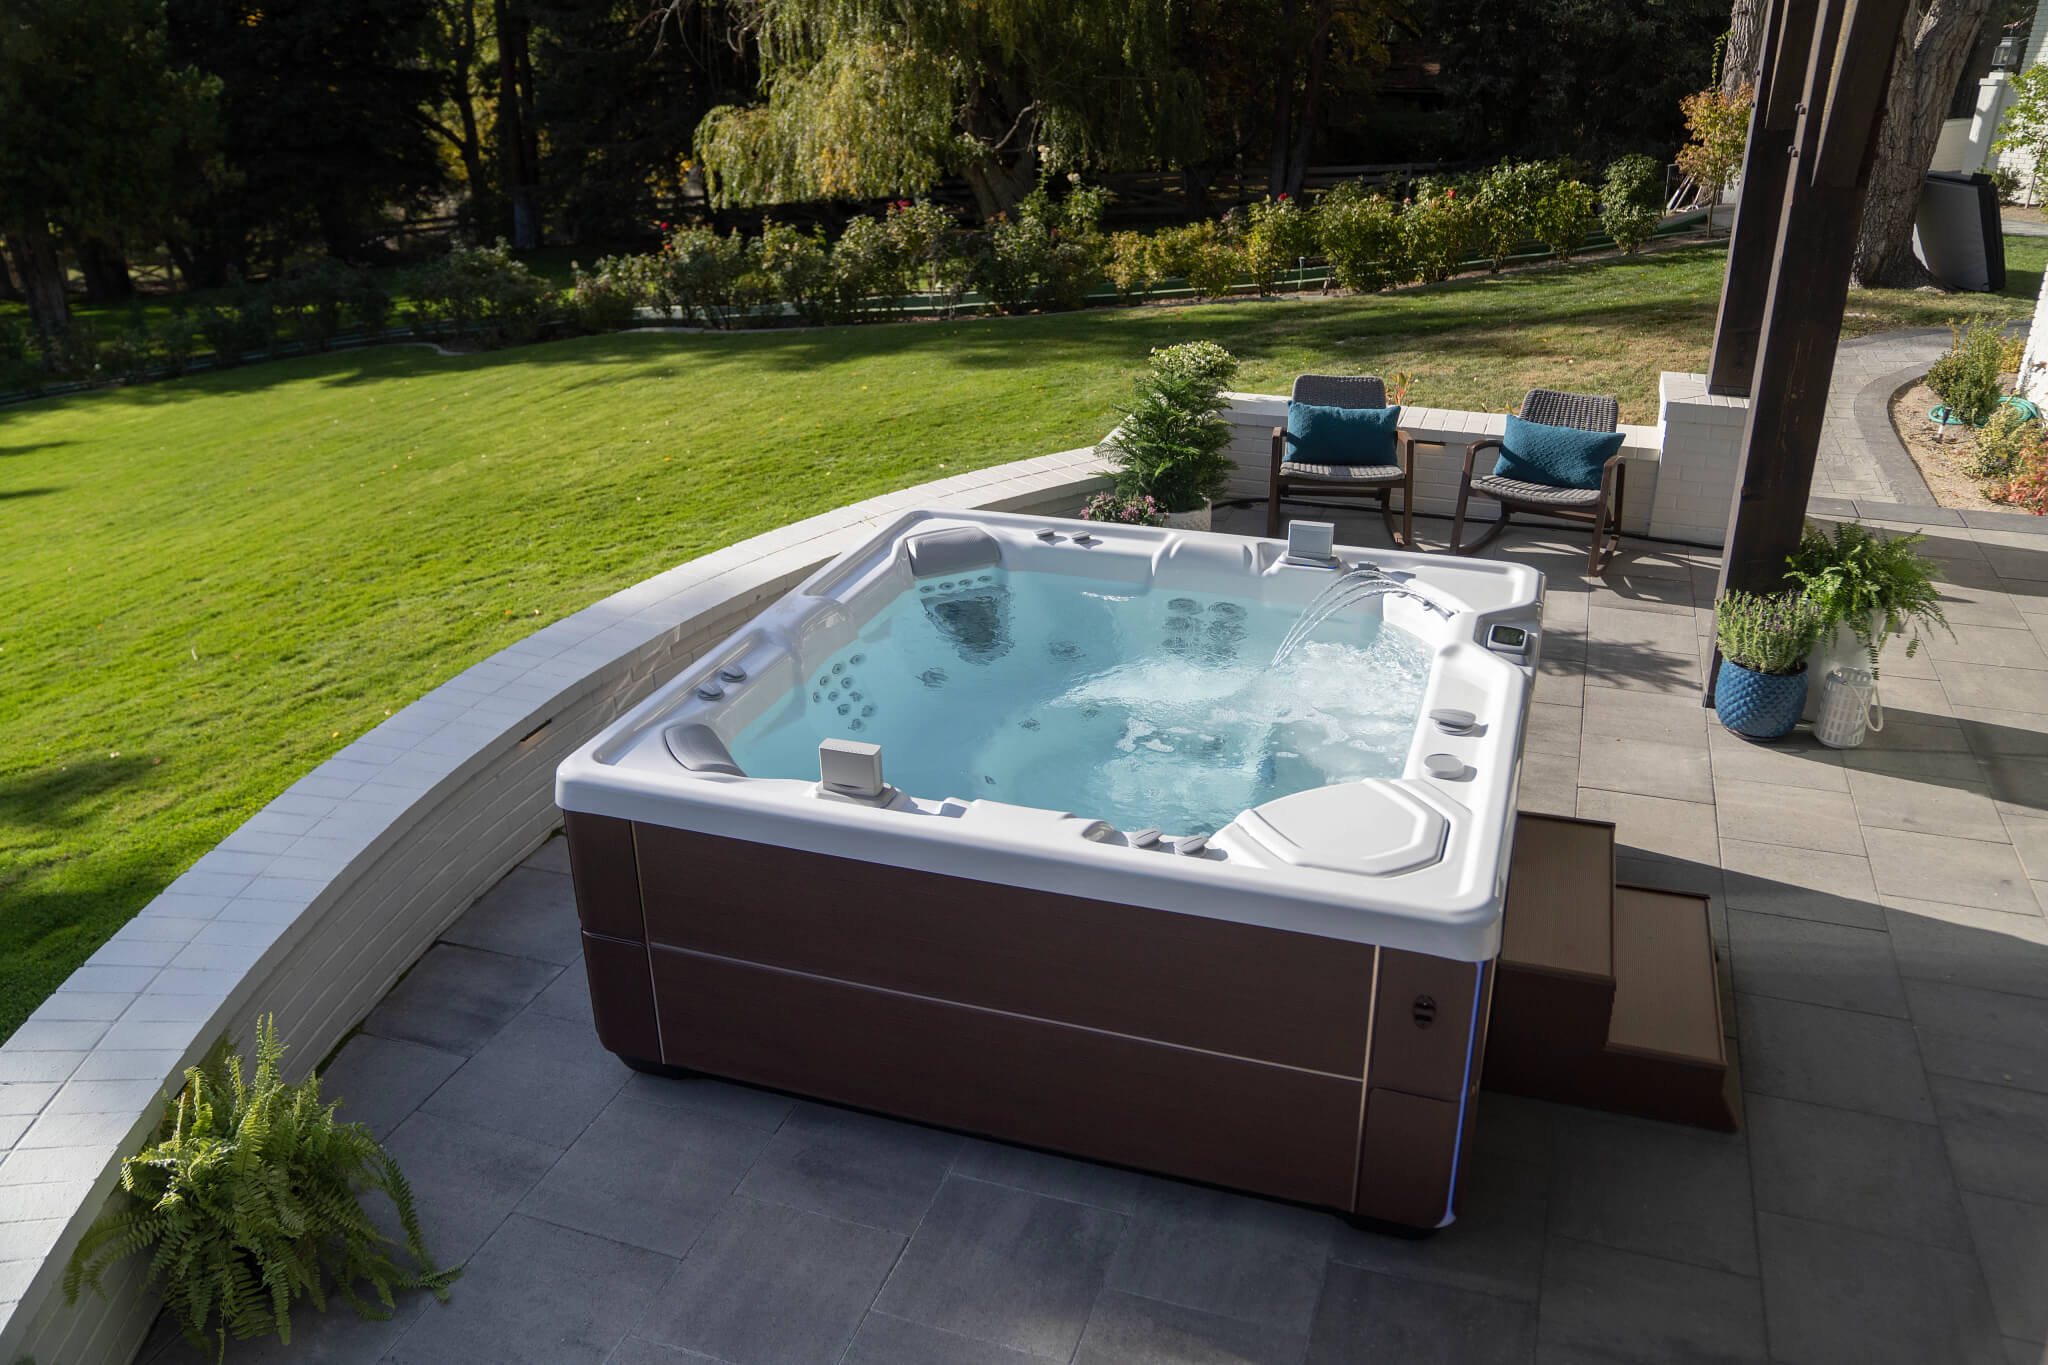 Elevating Backyard Escapes: Design Ideas for Your Great Atlantic Hot Tub Paradise